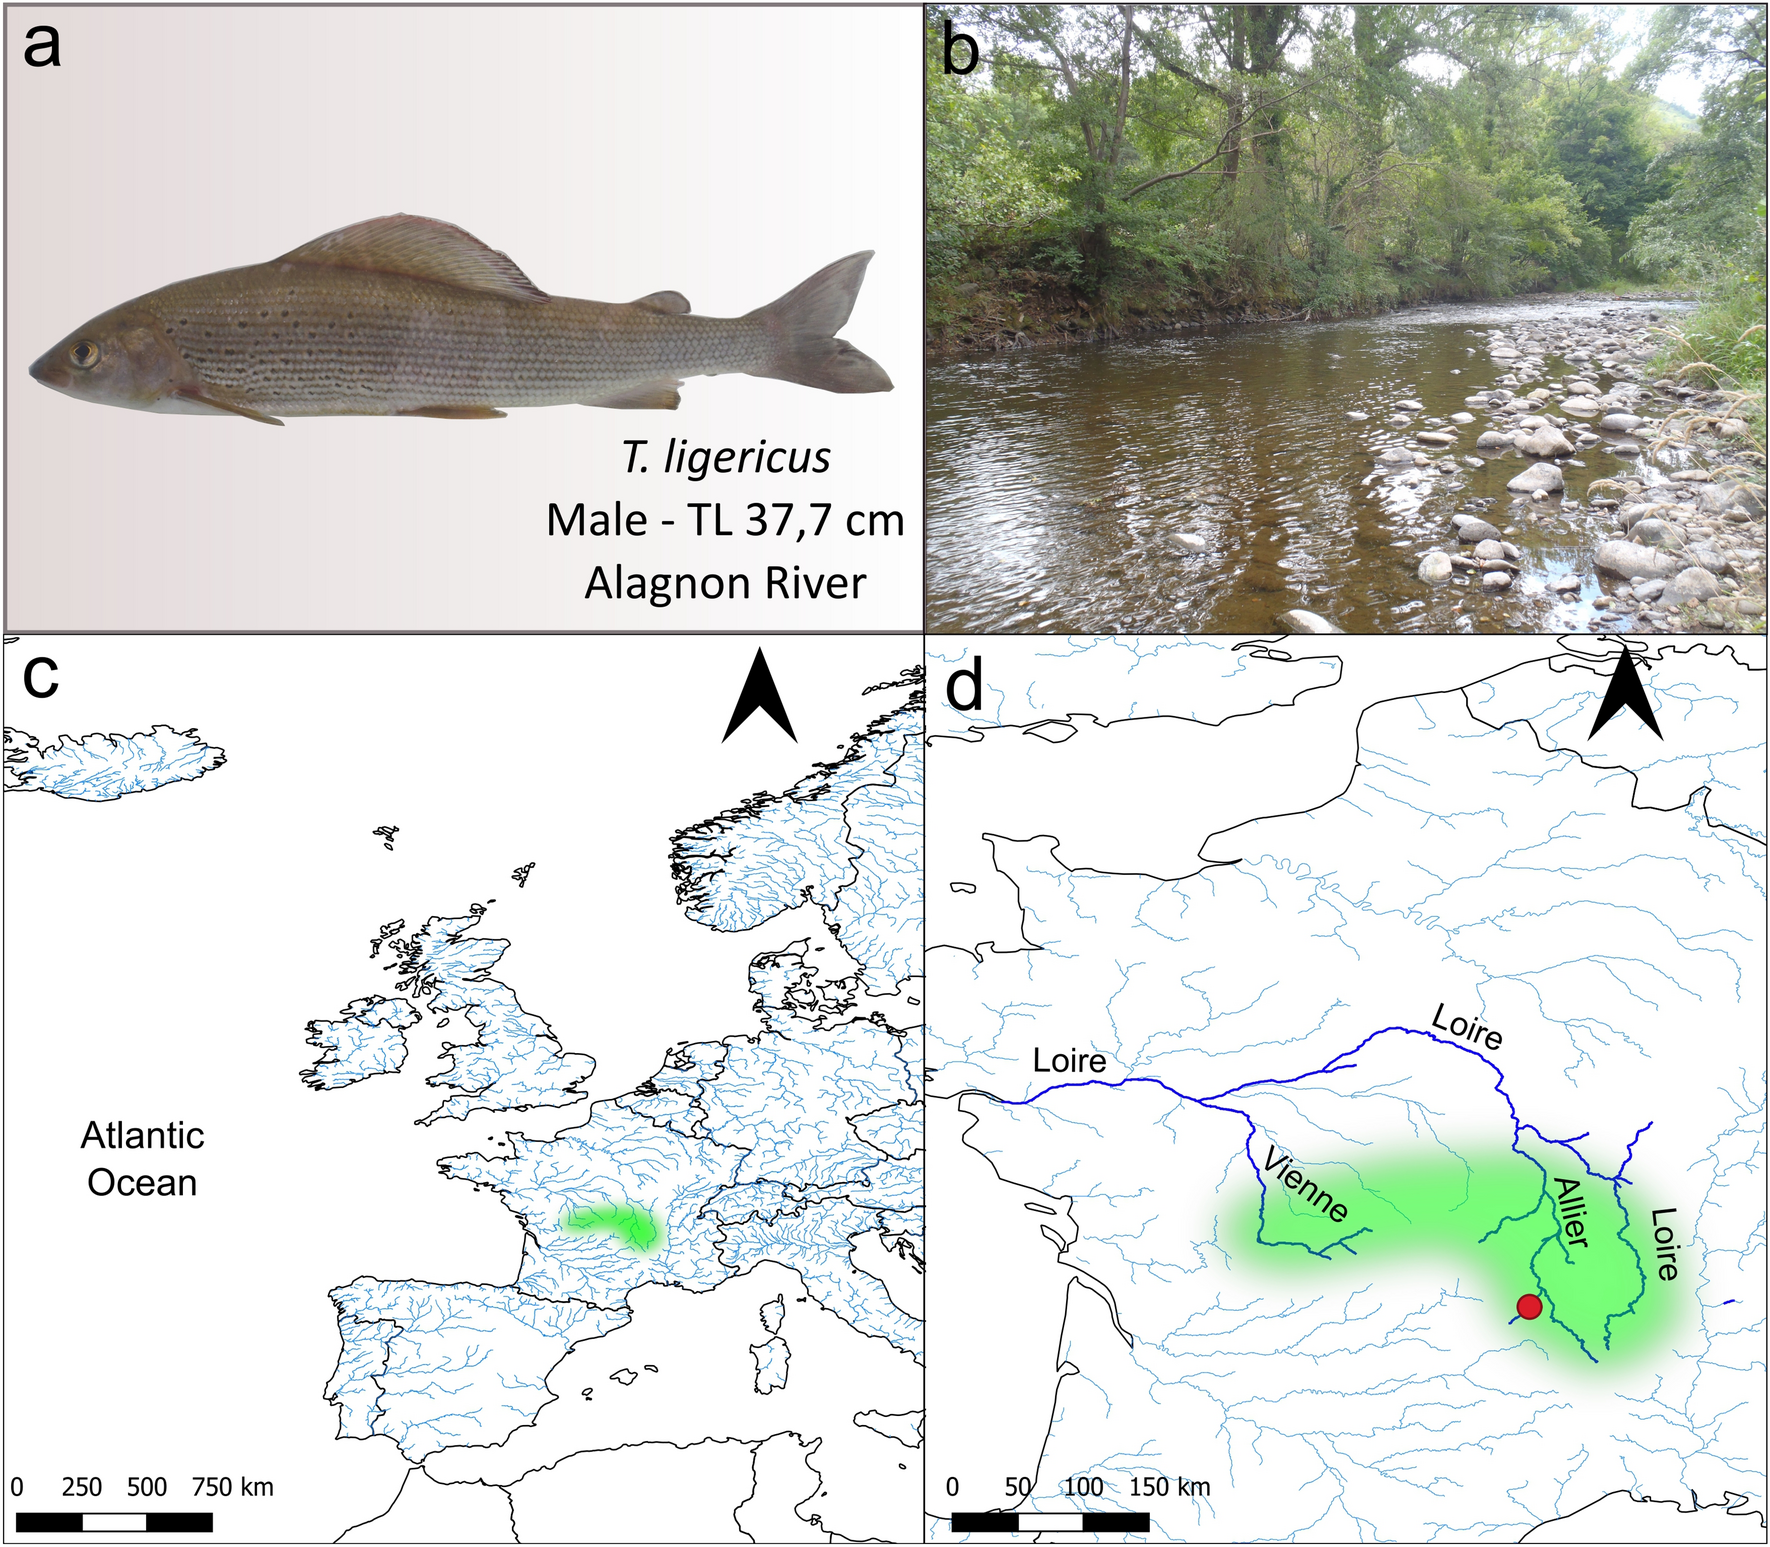 A multi-tissue de novo transcriptome assembly and relative gene expression of the vulnerable freshwater salmonid Thymallus ligericus